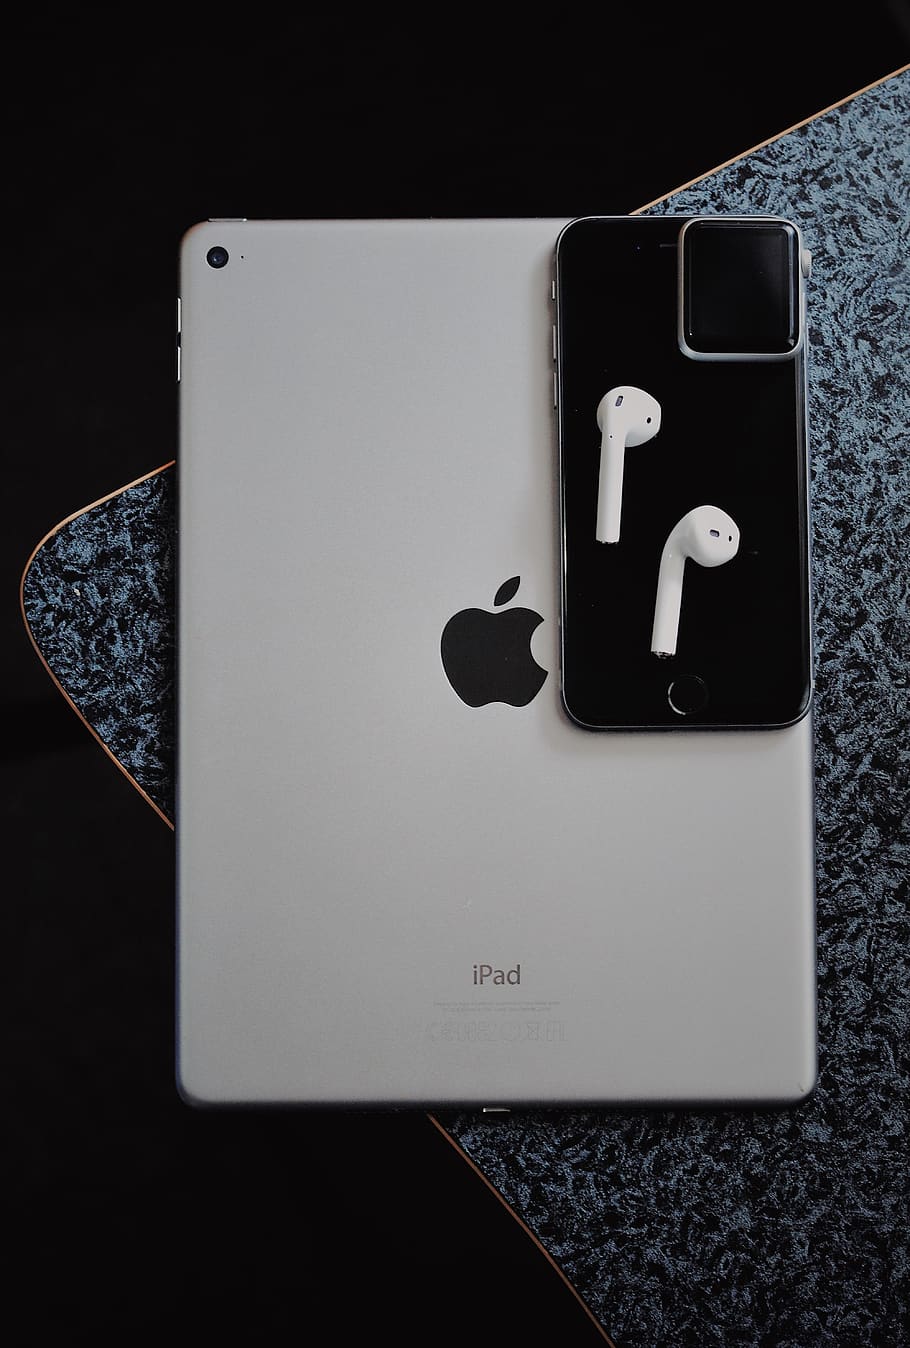 Apple, apple products, iphone, ipad, air, applewatch, airpods